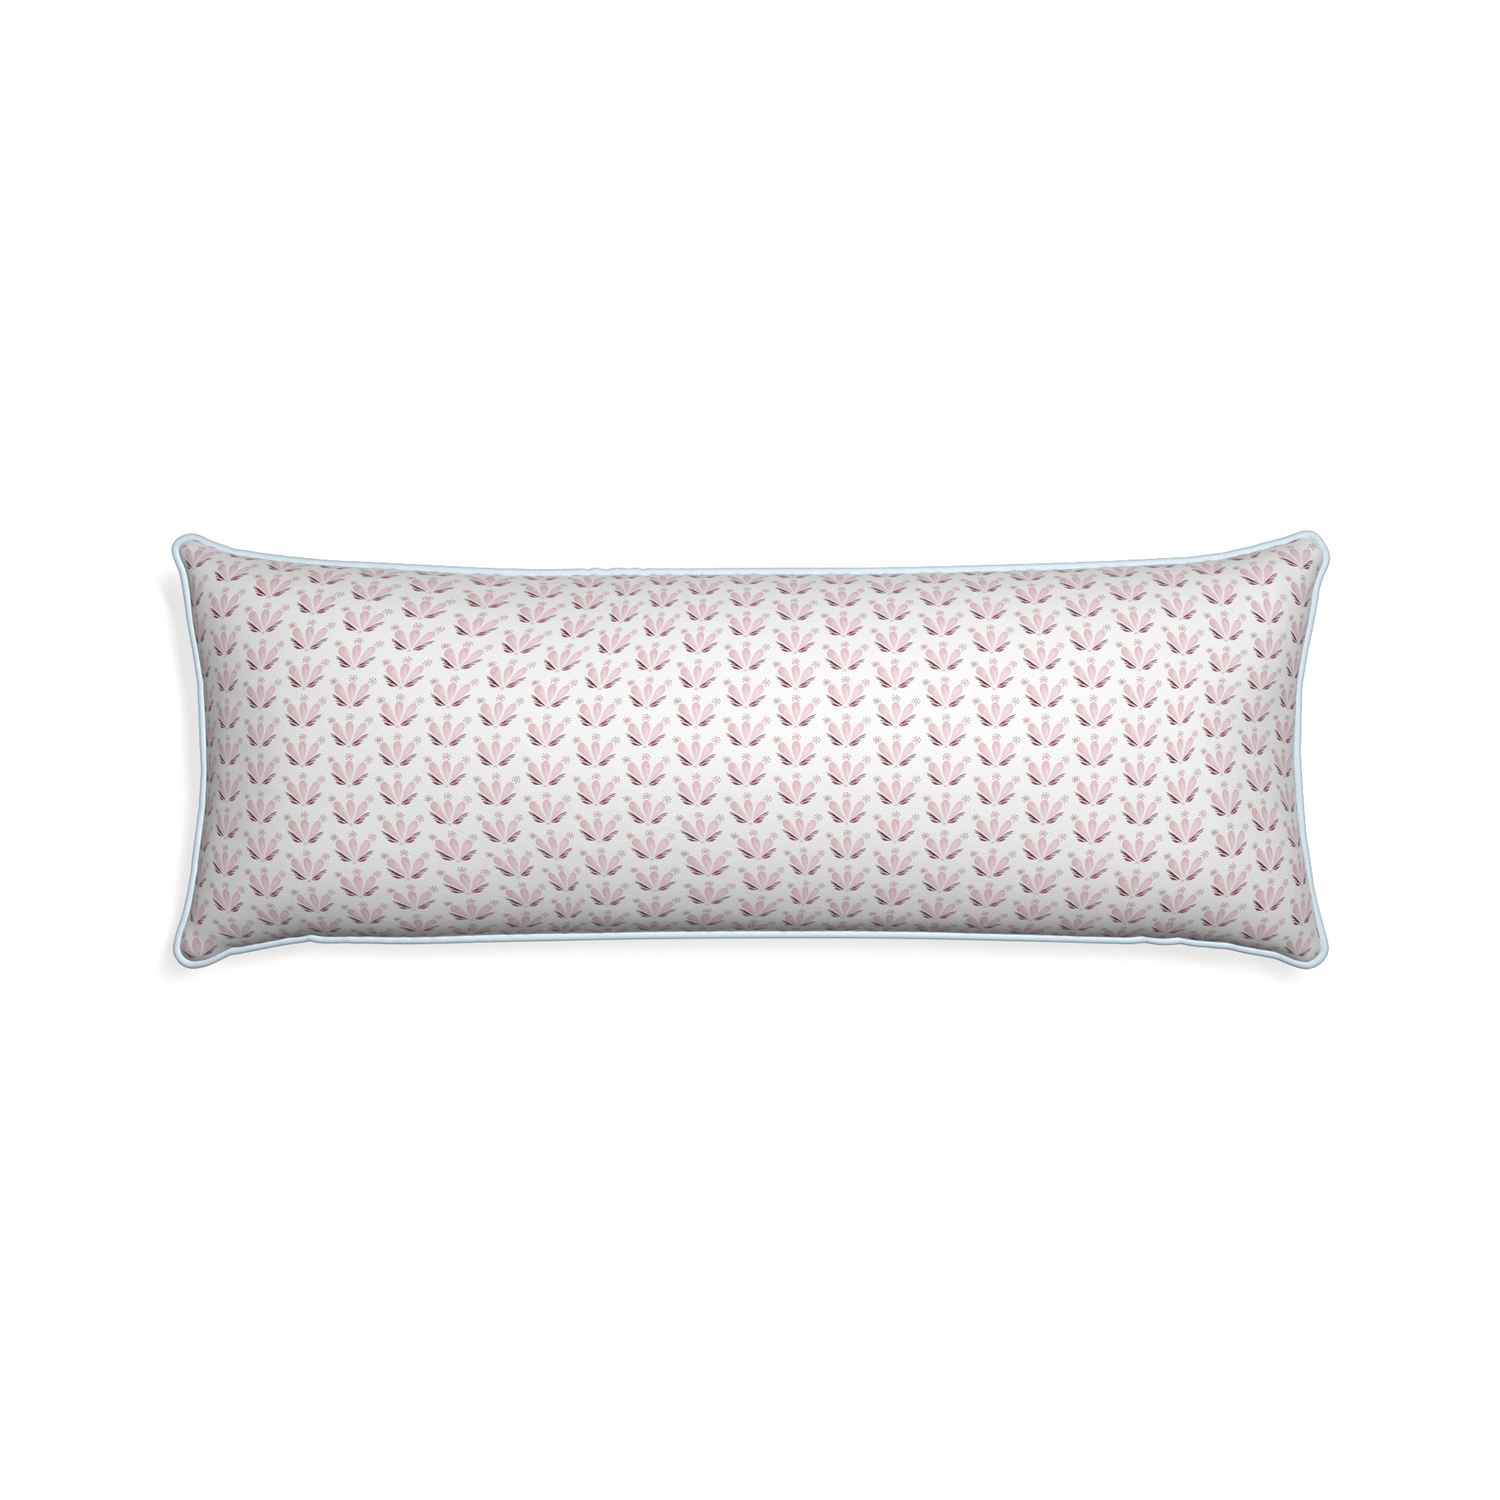 Xl-lumbar serena pink custom pink & burgundy drop repeat floralpillow with powder piping on white background